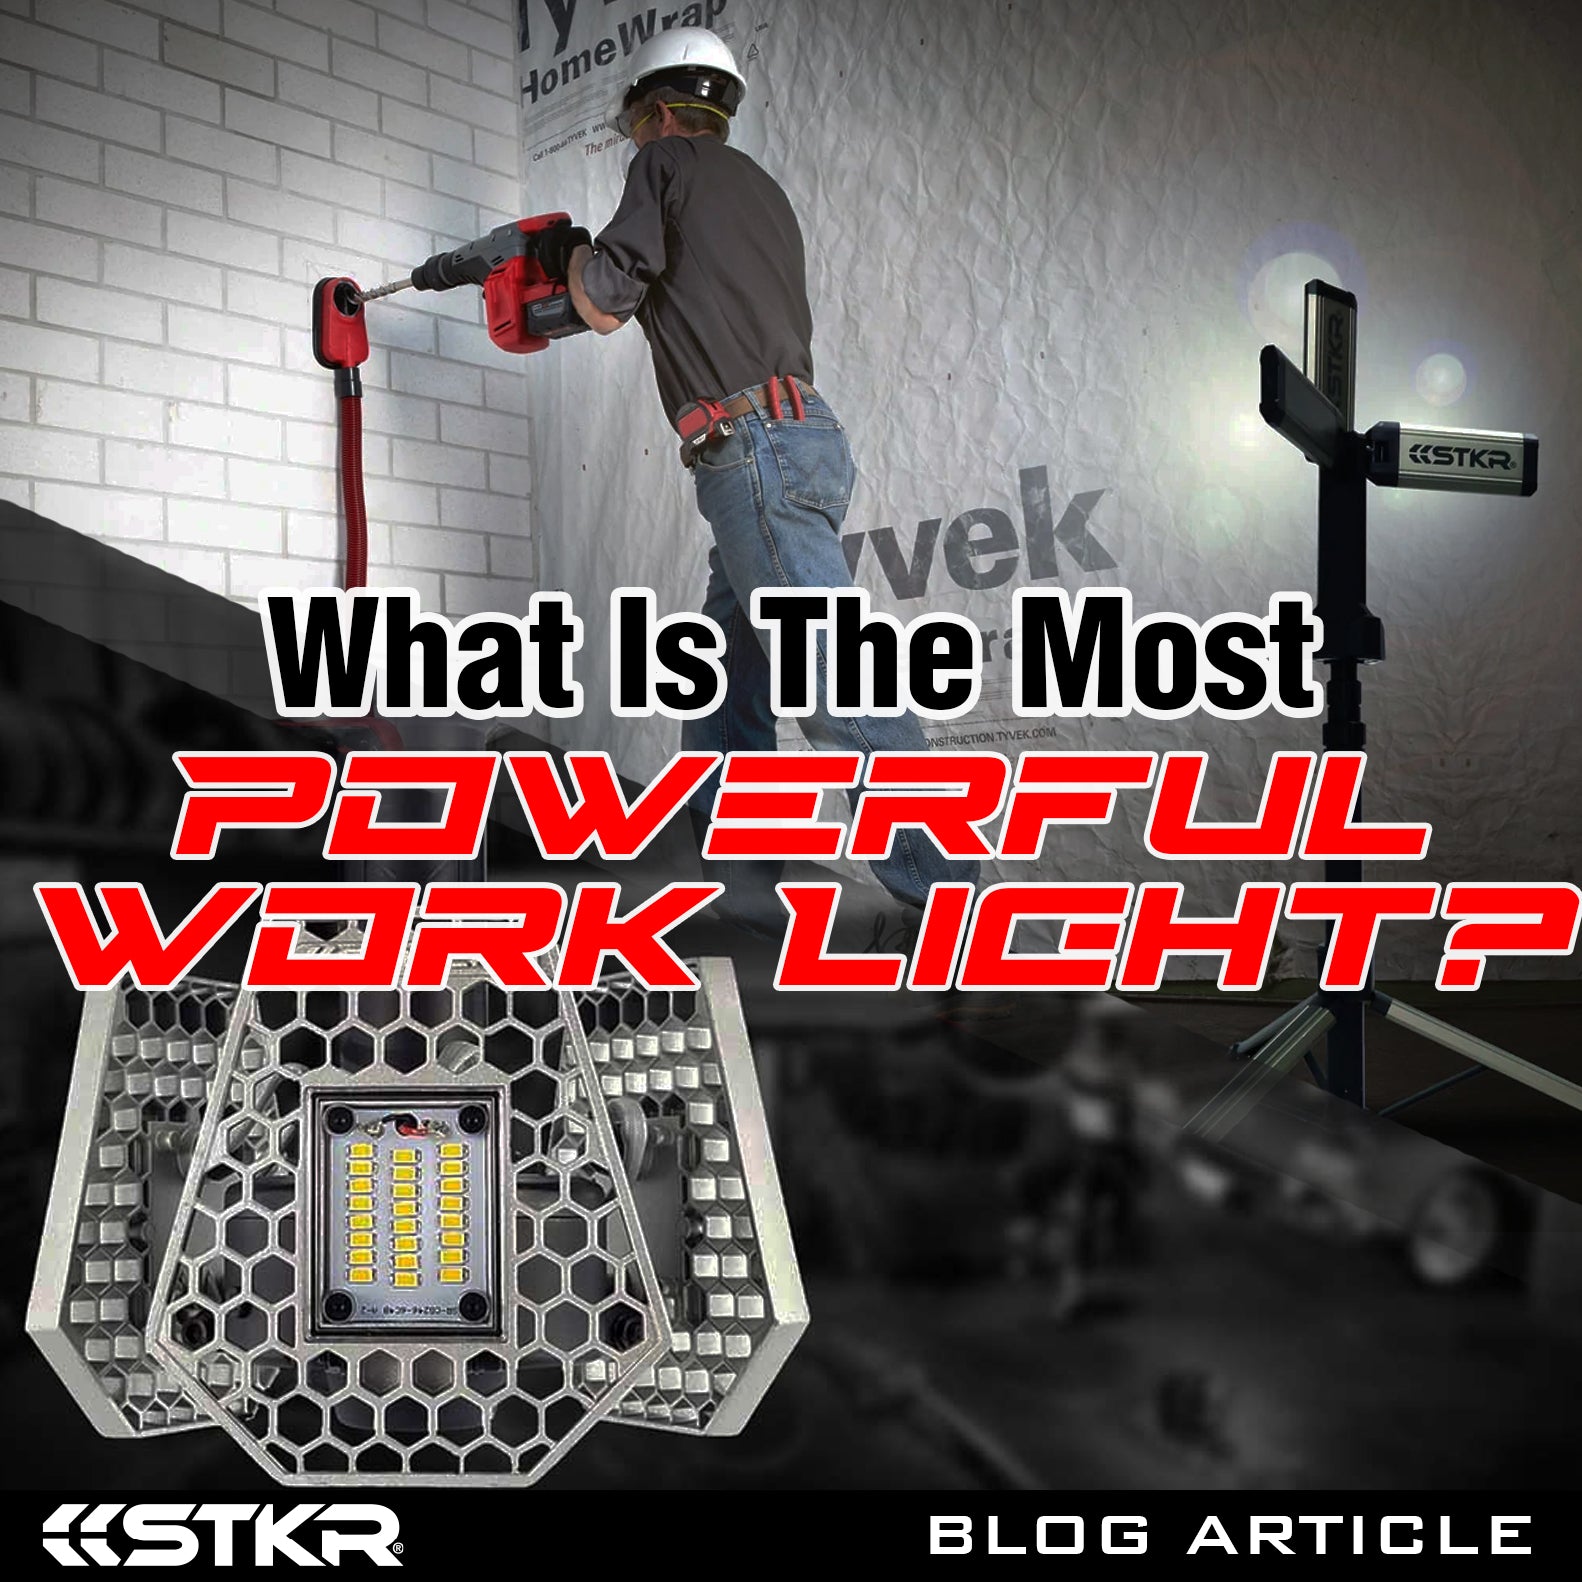 What Is the Most Powerful Work Light?